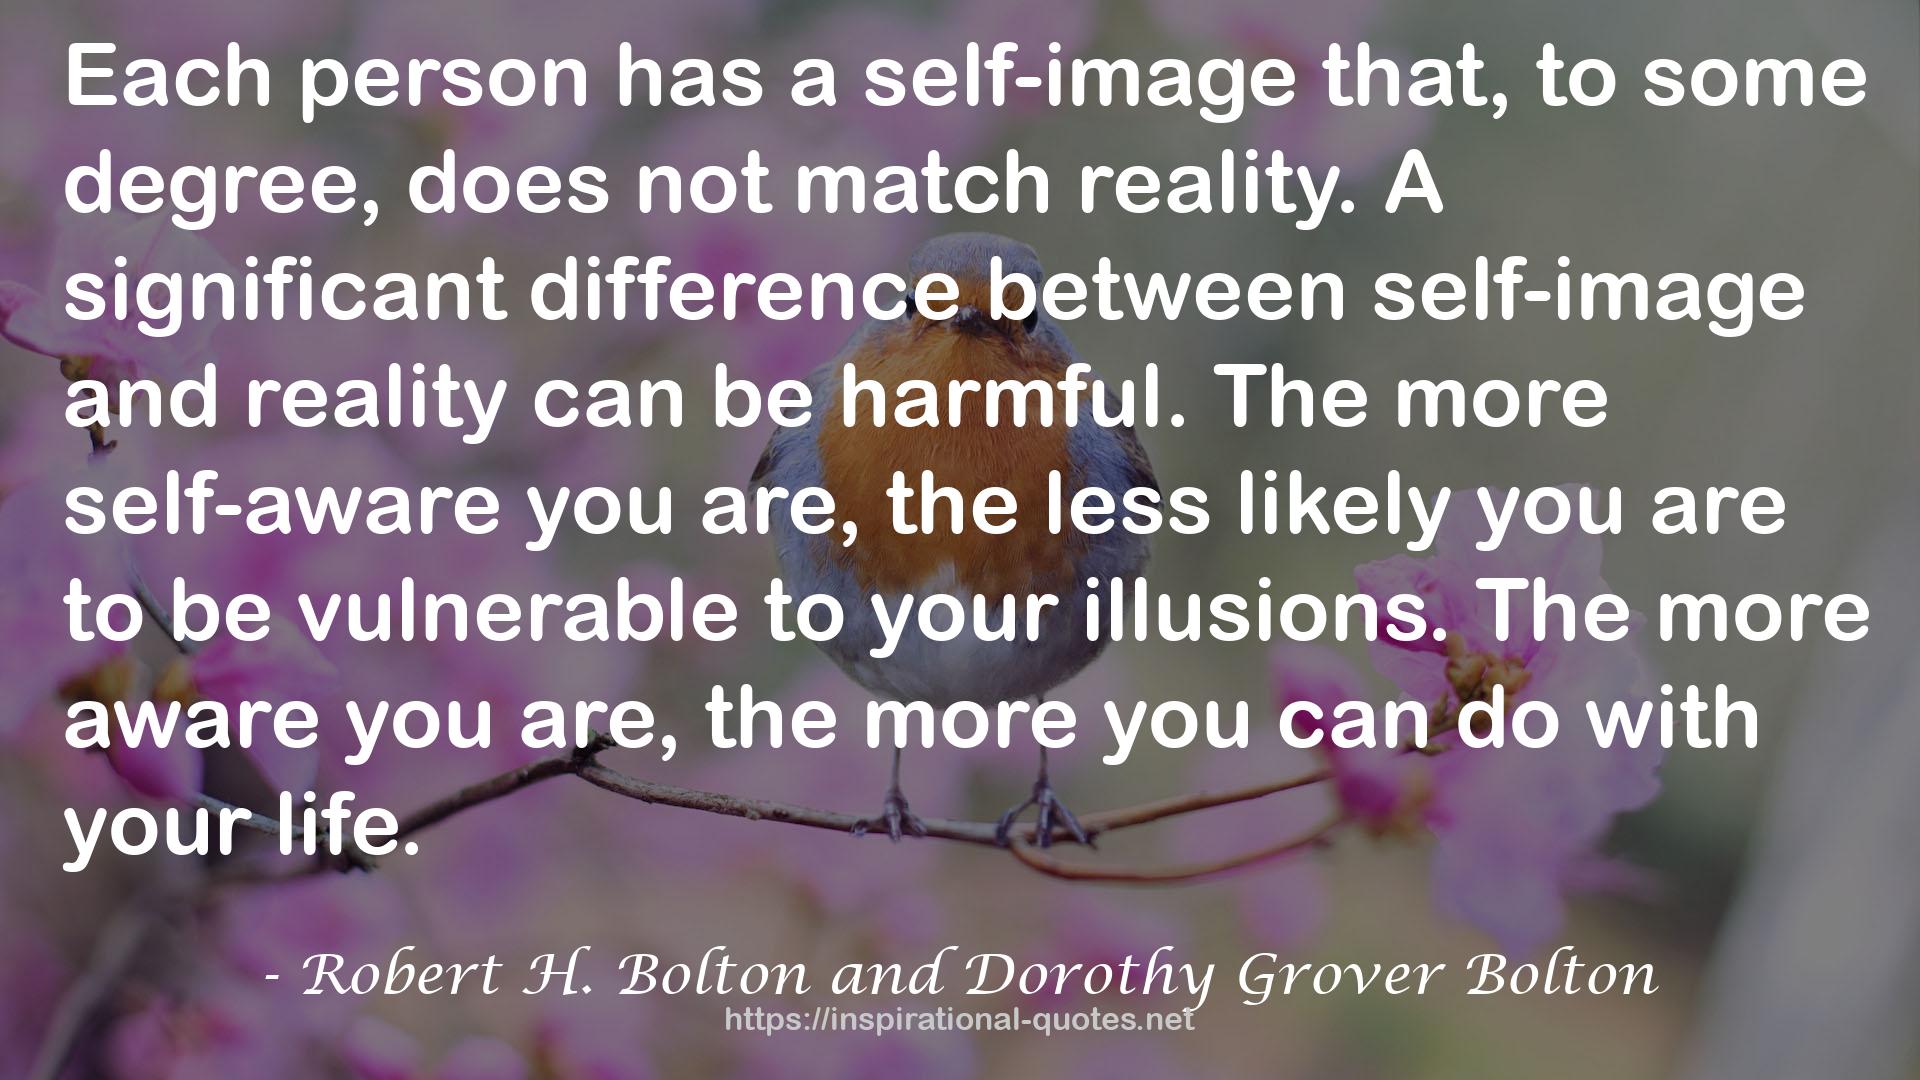 Robert H. Bolton and Dorothy Grover Bolton QUOTES